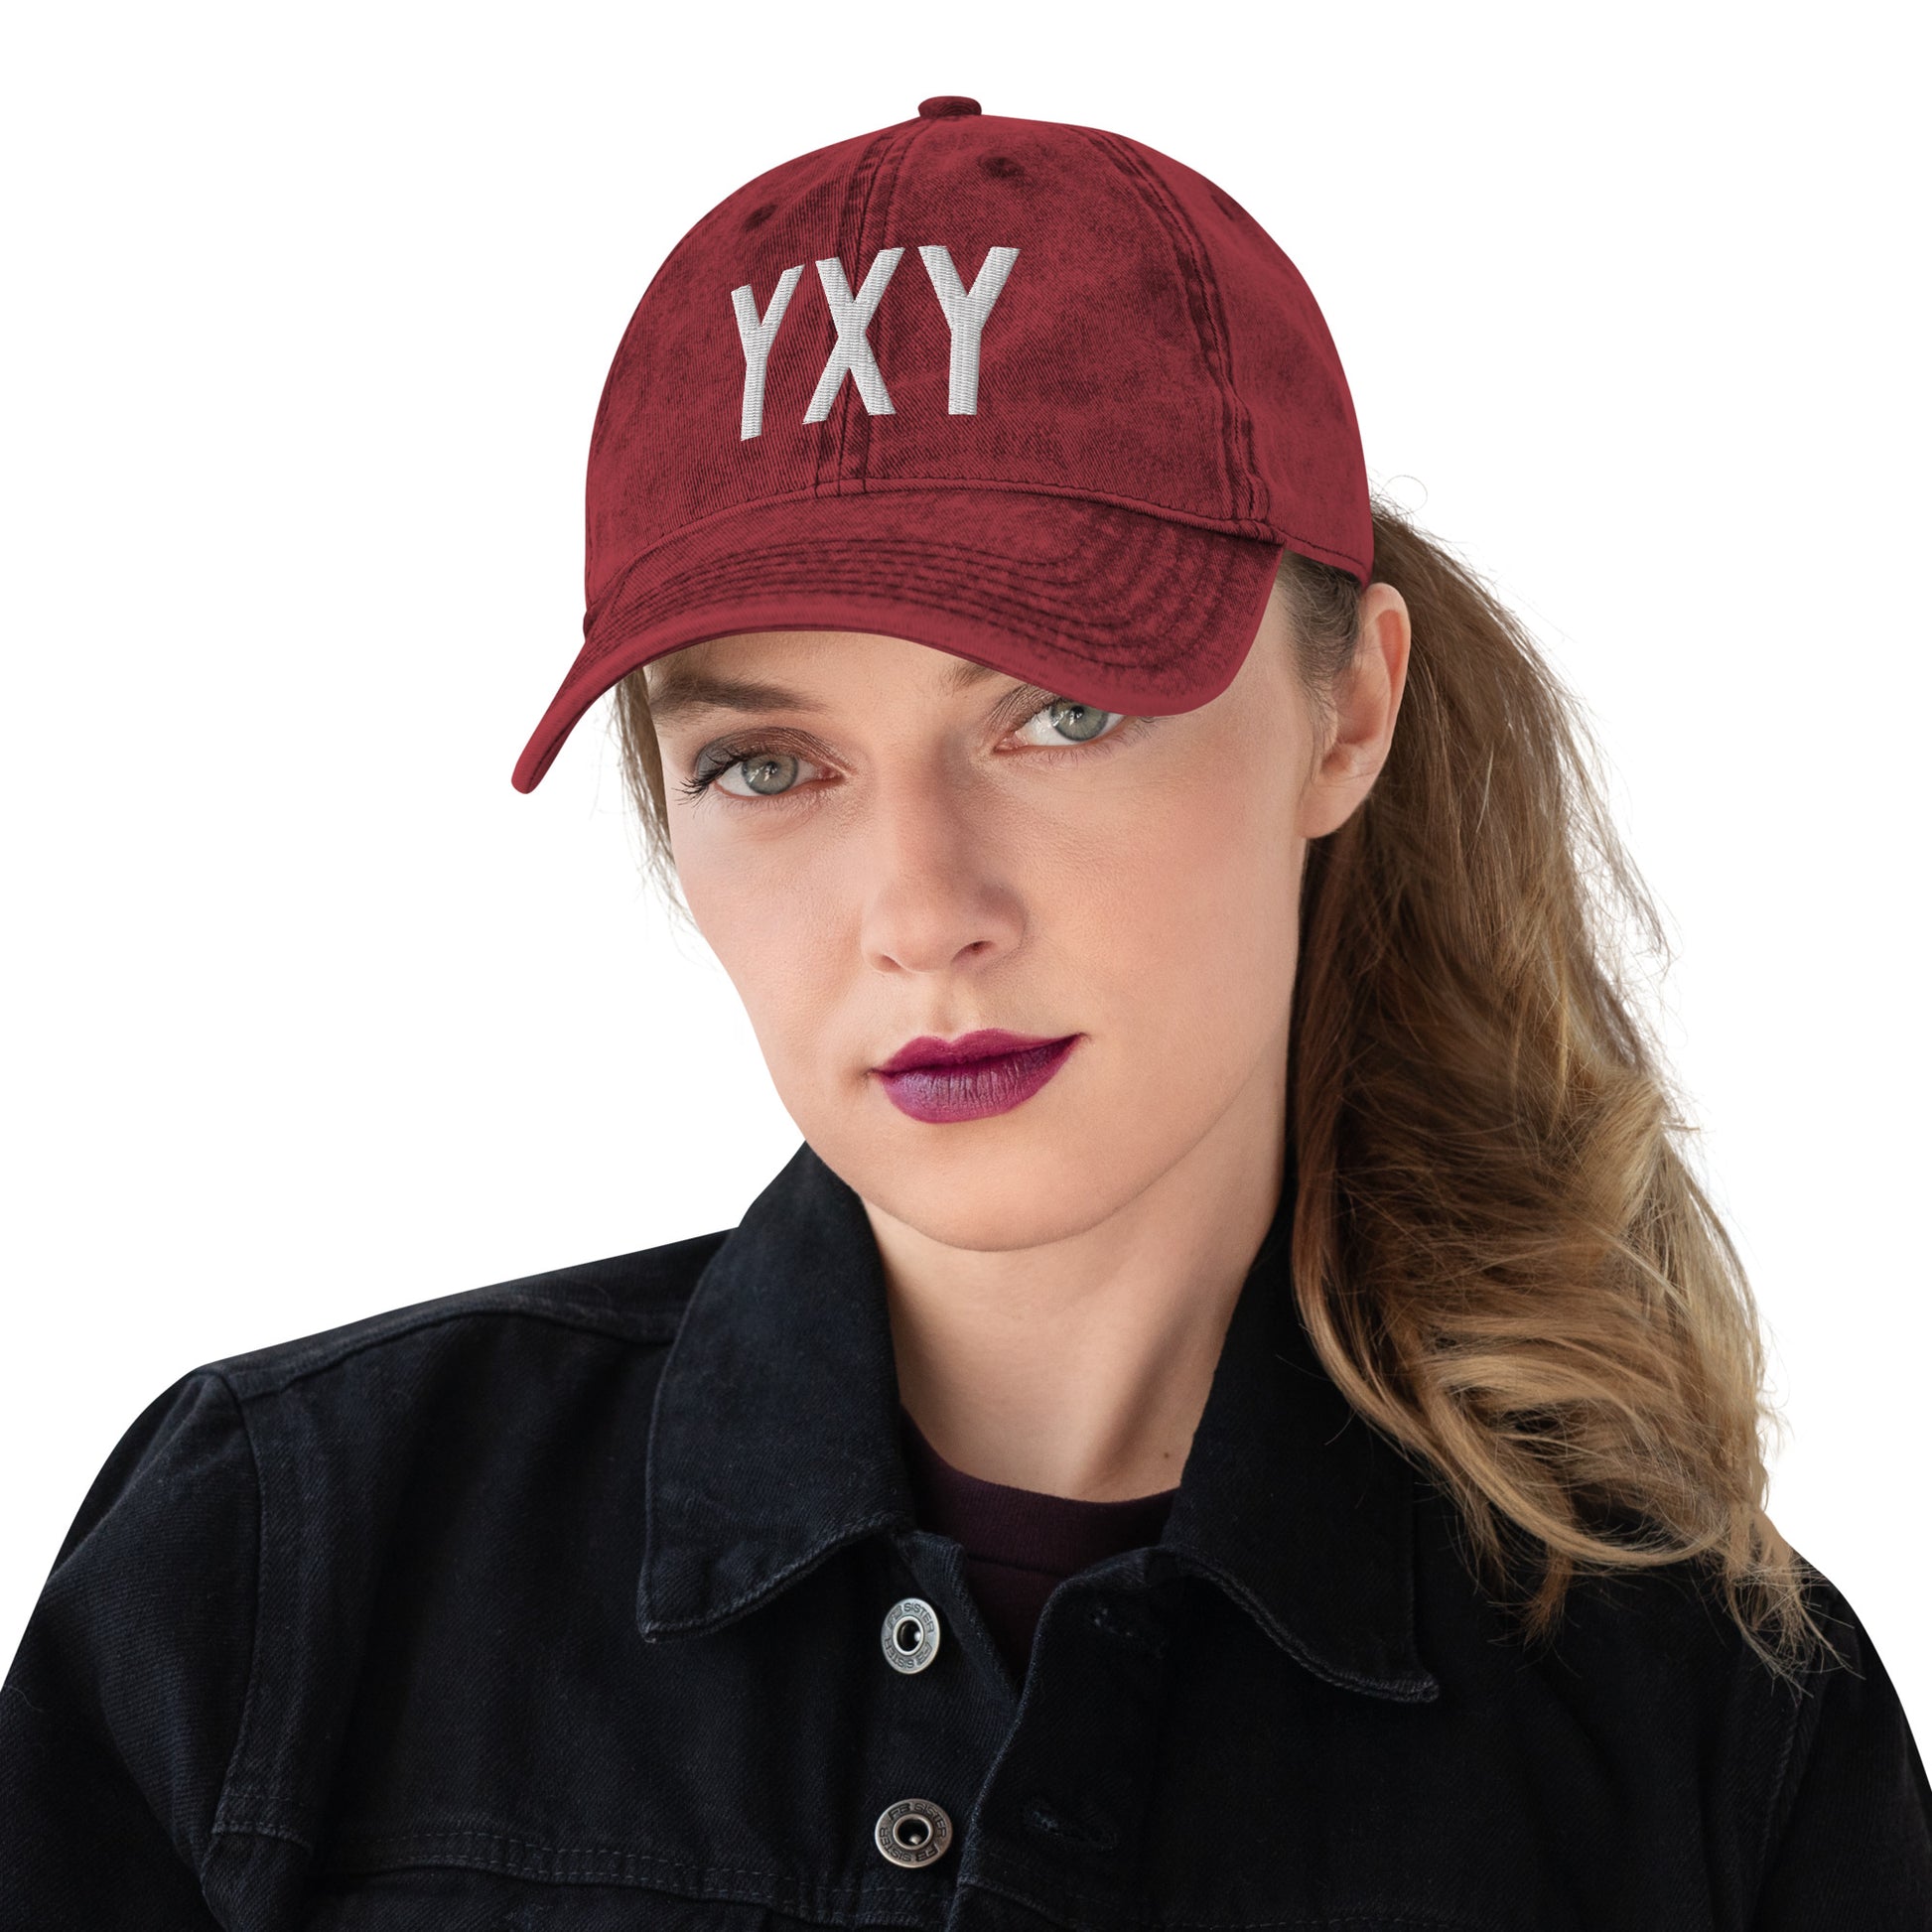 Airport Code Twill Cap - White • YXY Whitehorse • YHM Designs - Image 05